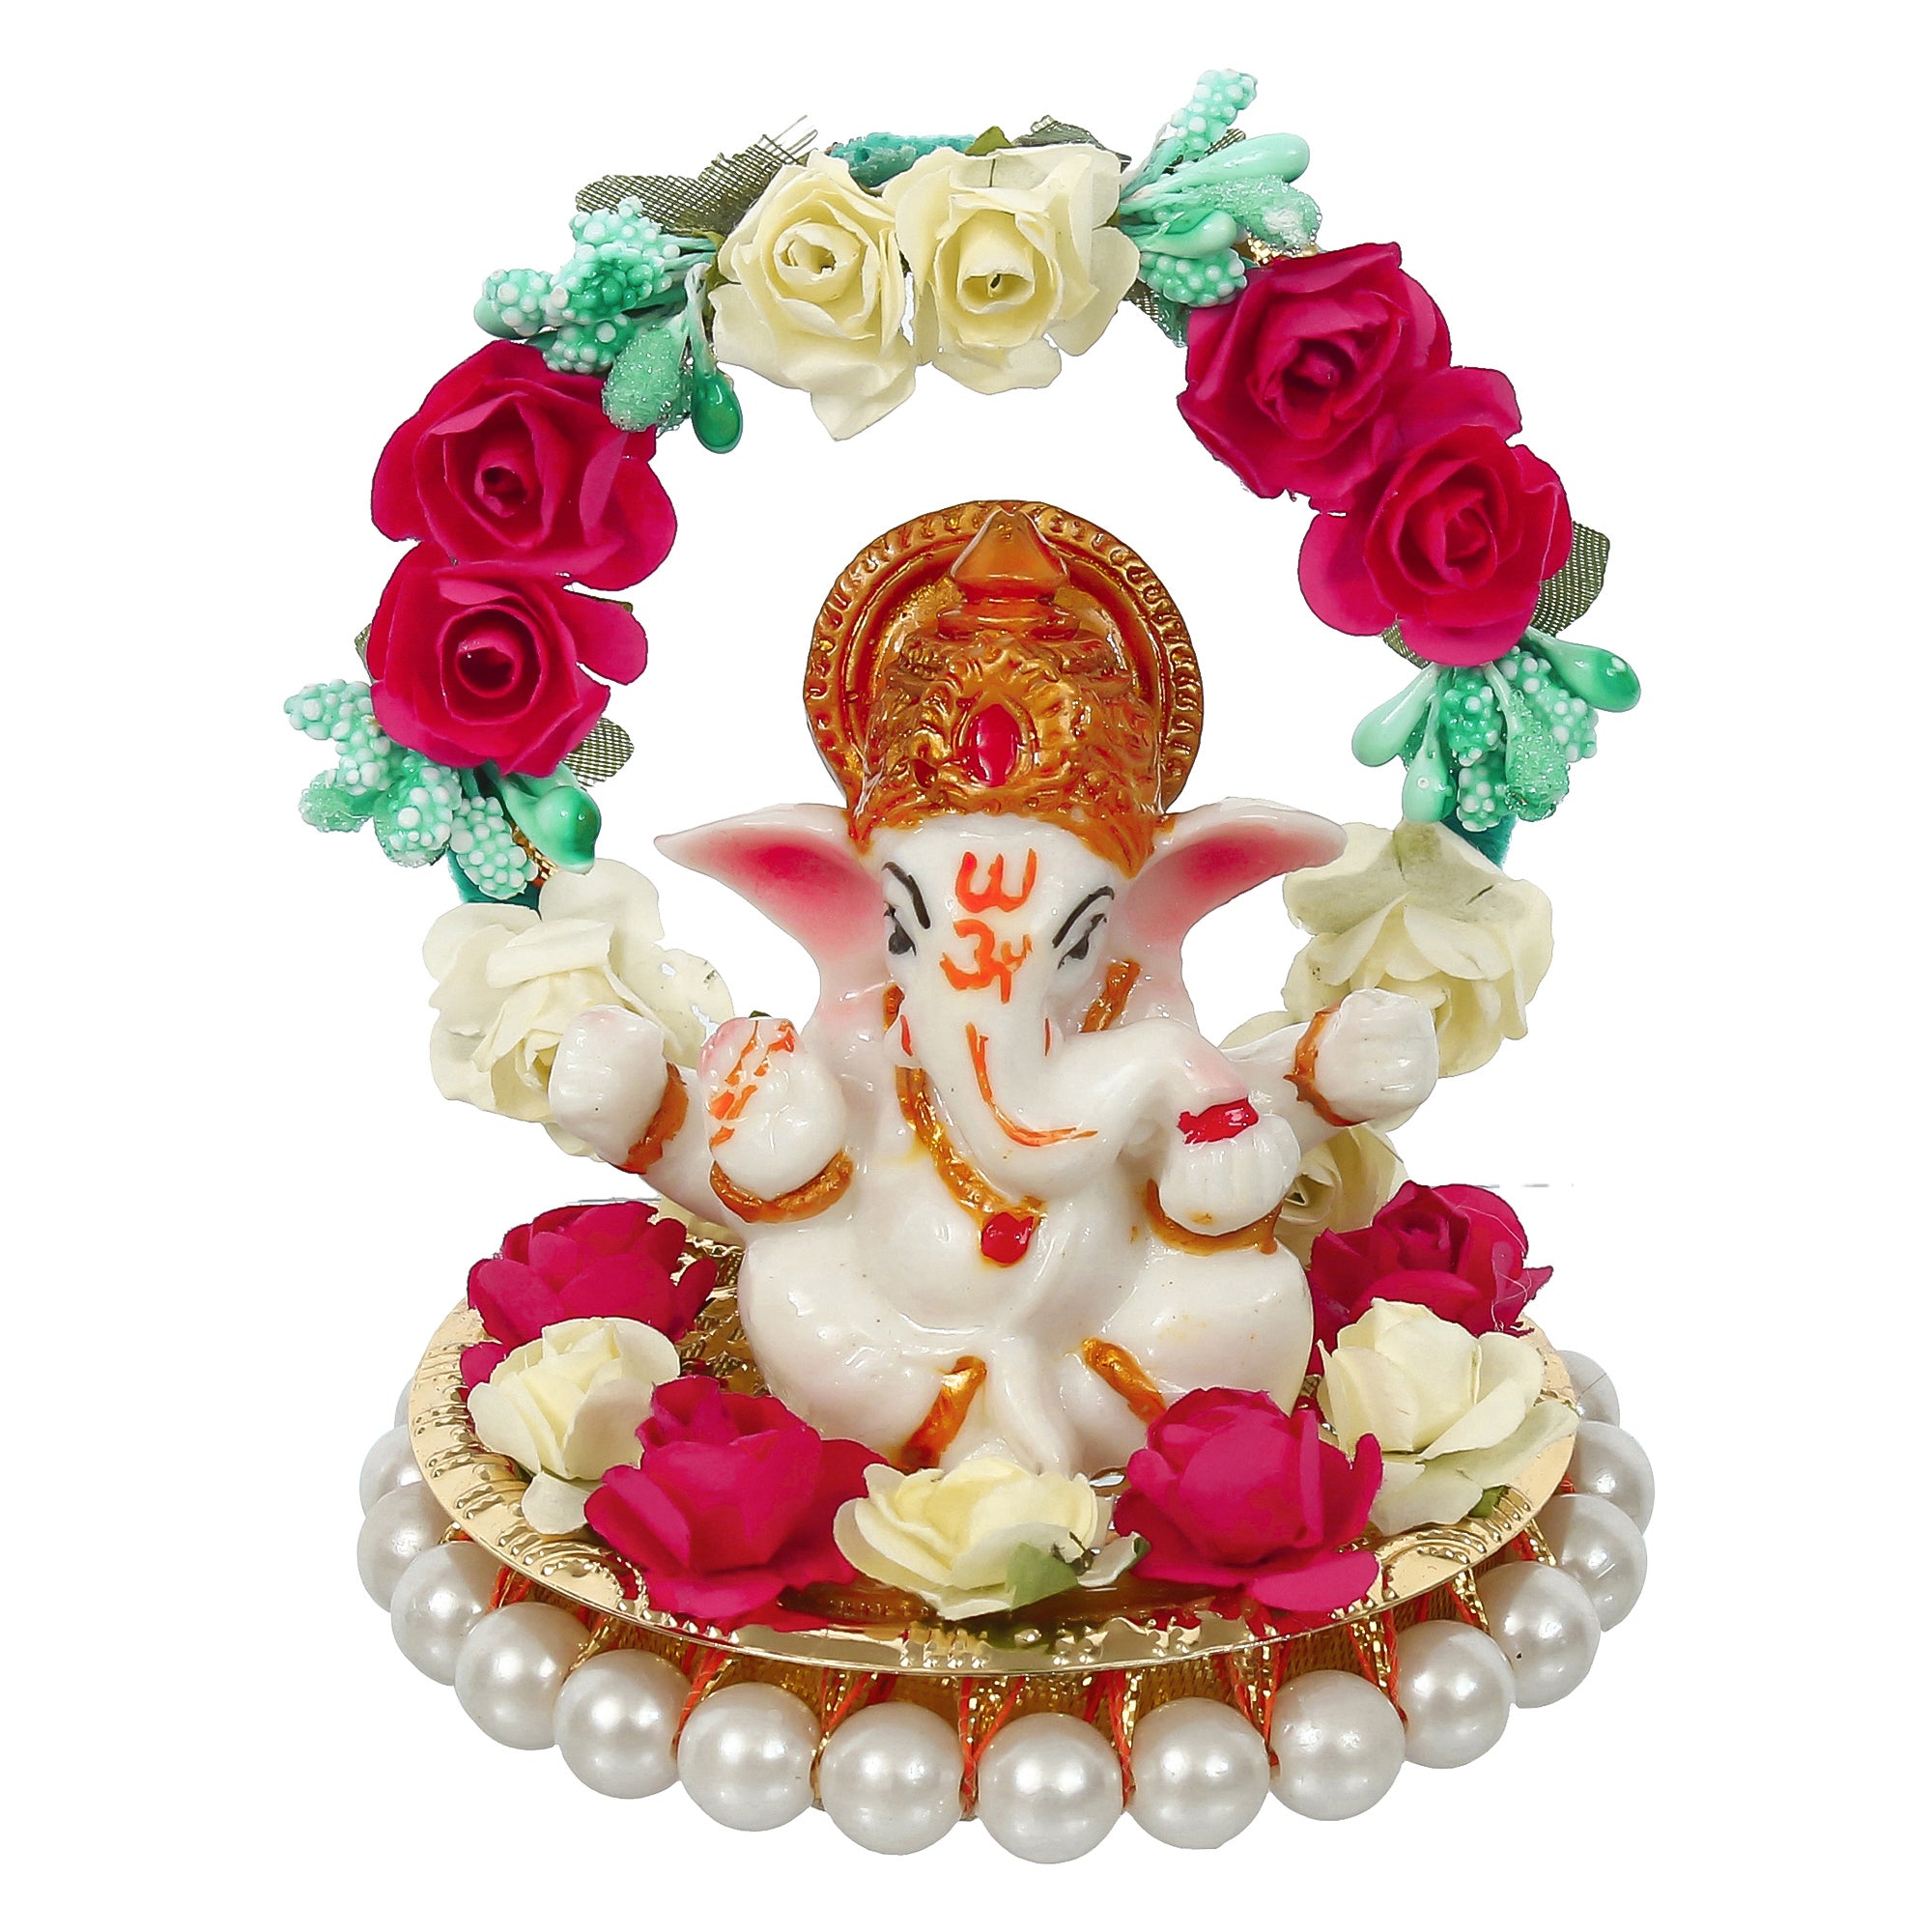 Polyresin Lord Ganesha Idol on Decorative Handcrafted Plate with Throne of Colorful Flowers 2